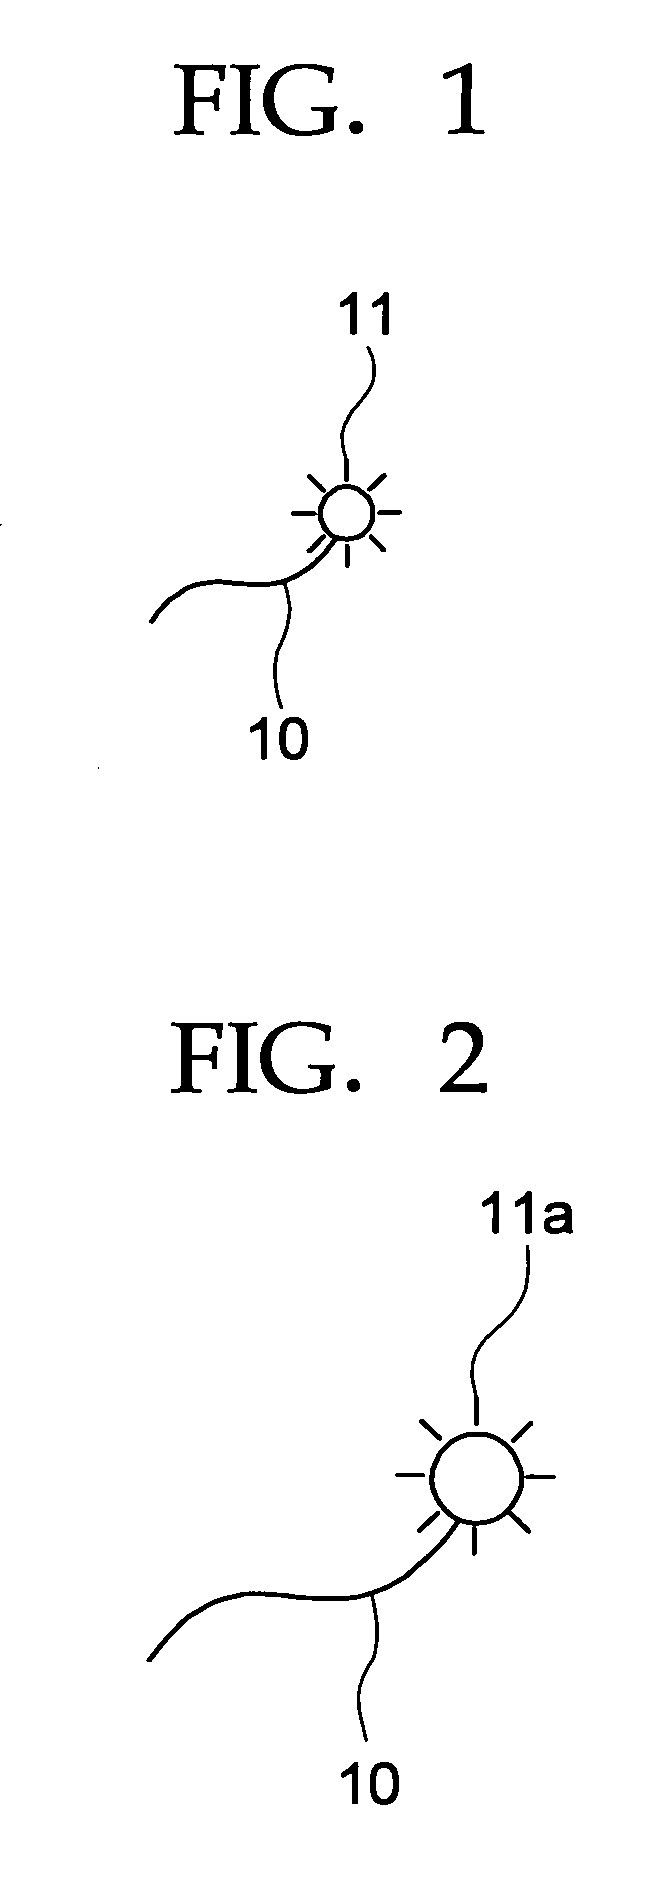 Target detecting device and target capturer, device and method for molecular adsorption or desorption, and device and method for protein detection